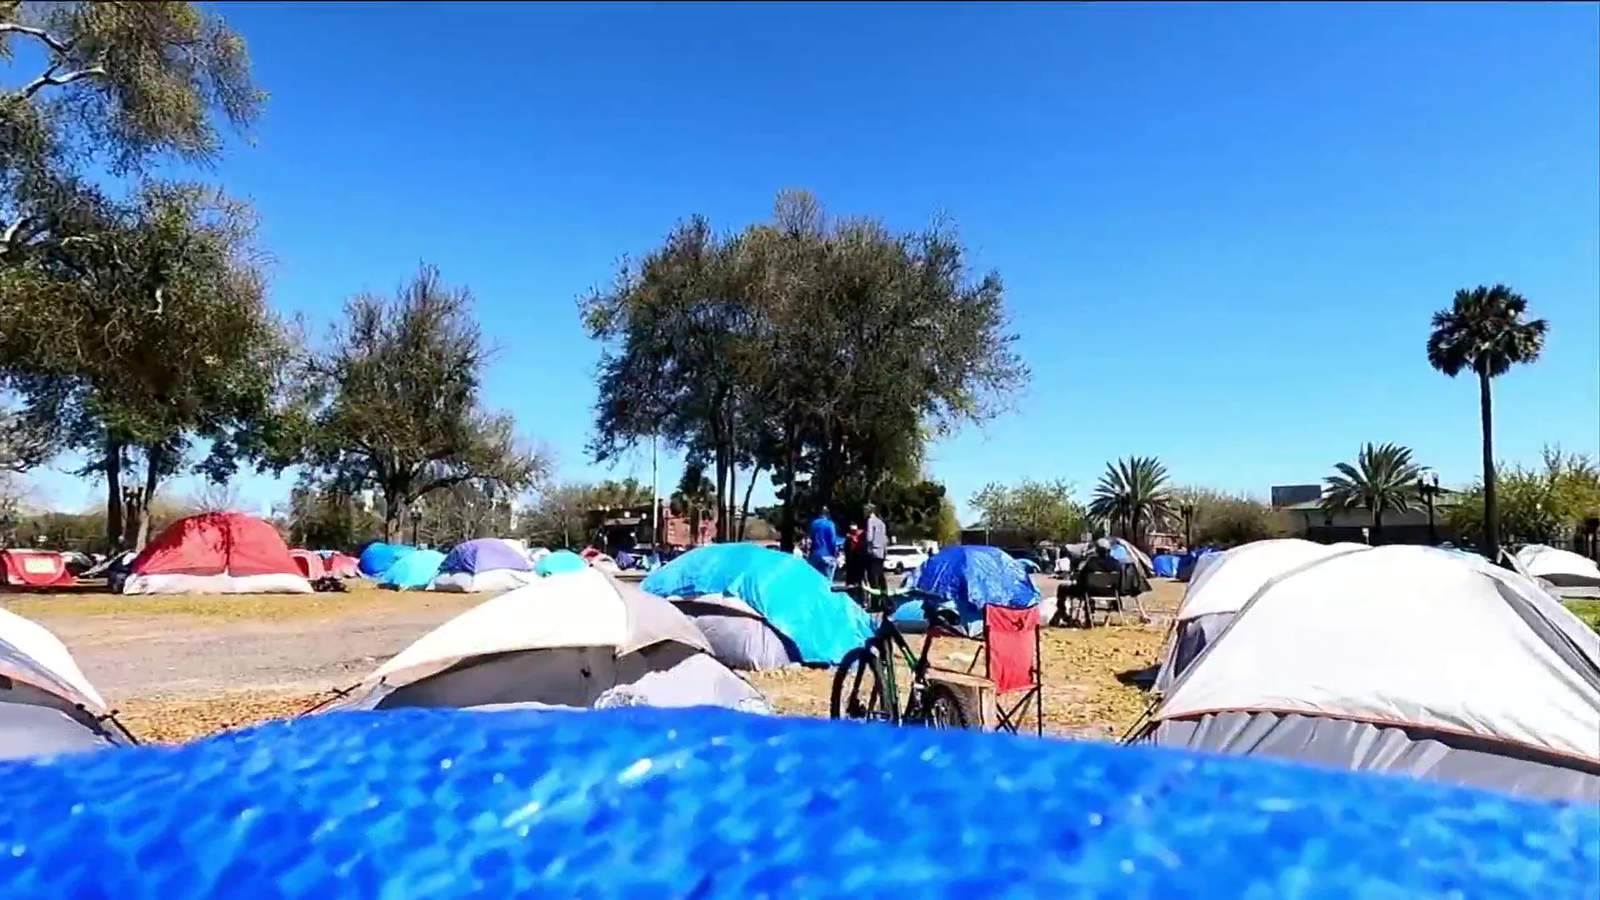 Final night of tent city before Jacksonville moves homeless into nearby shelter